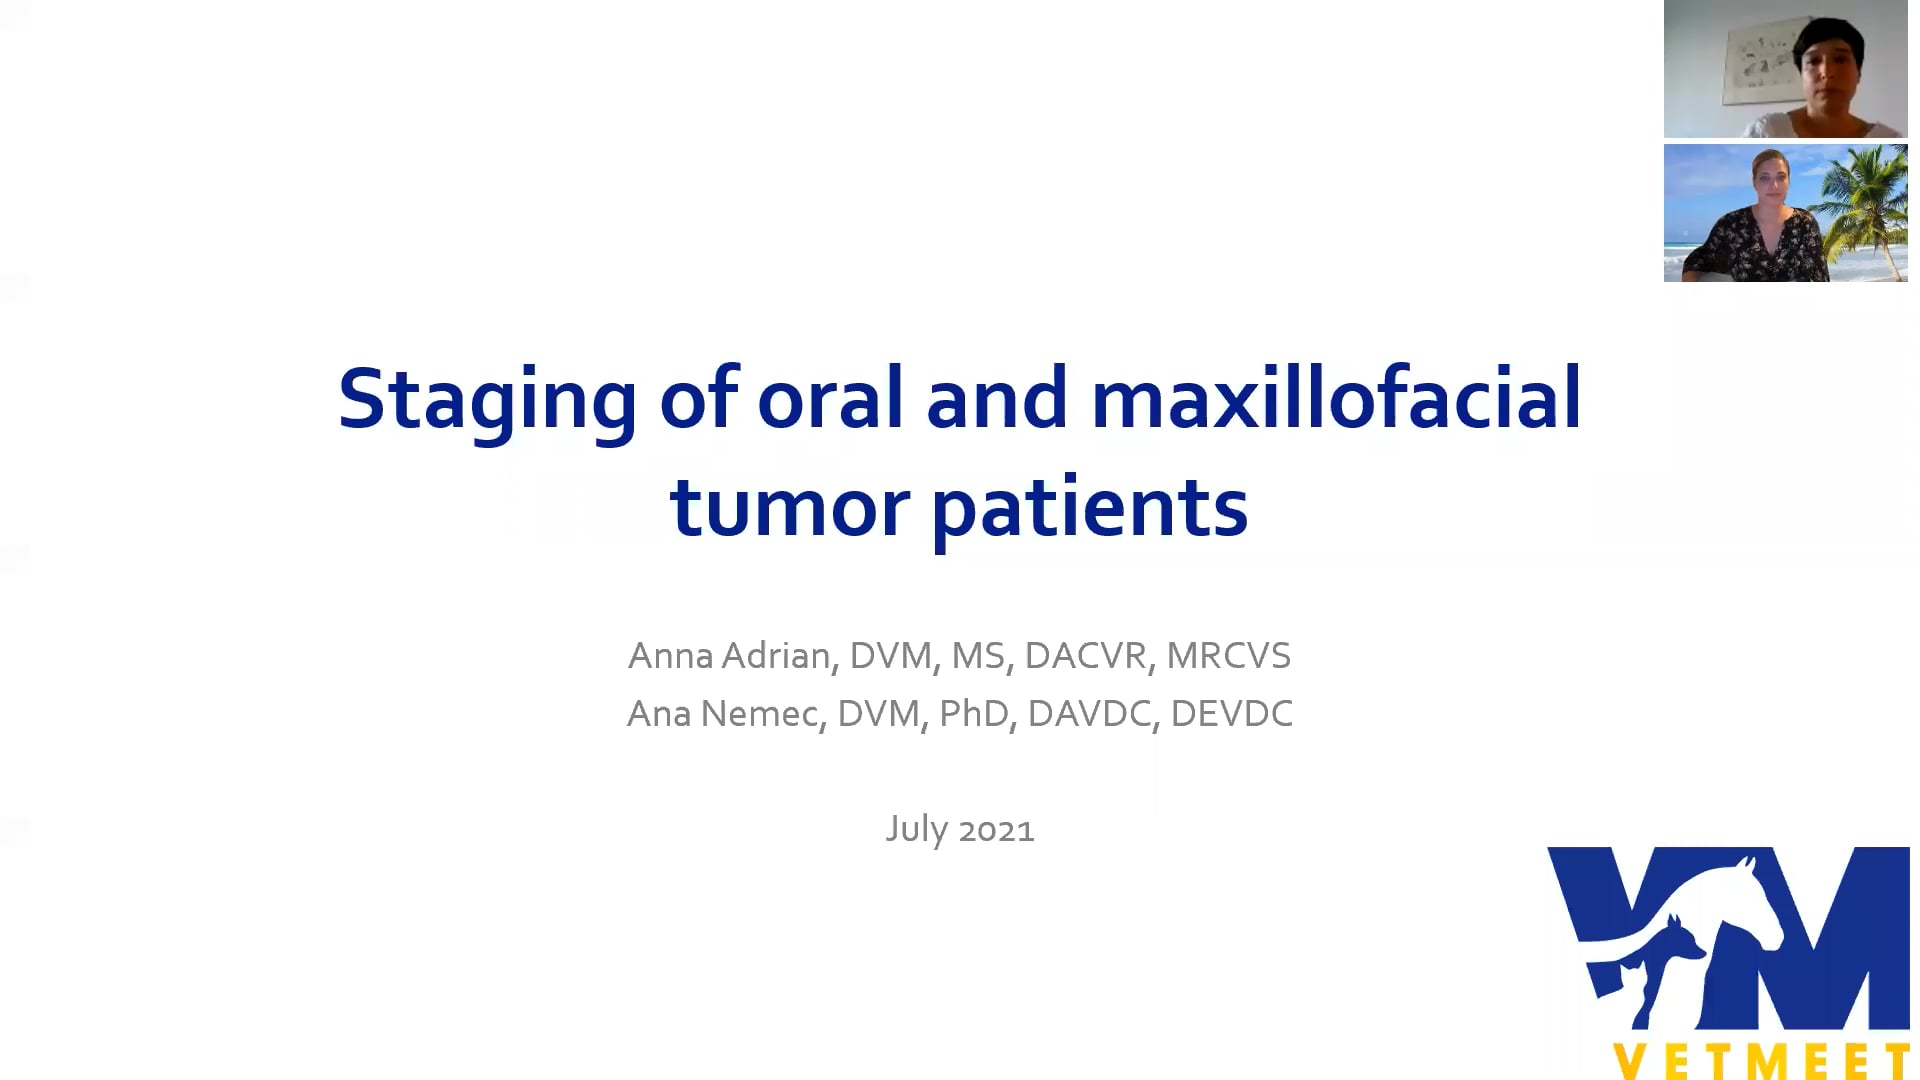 Staging of oral and maxillofacial tumor patients